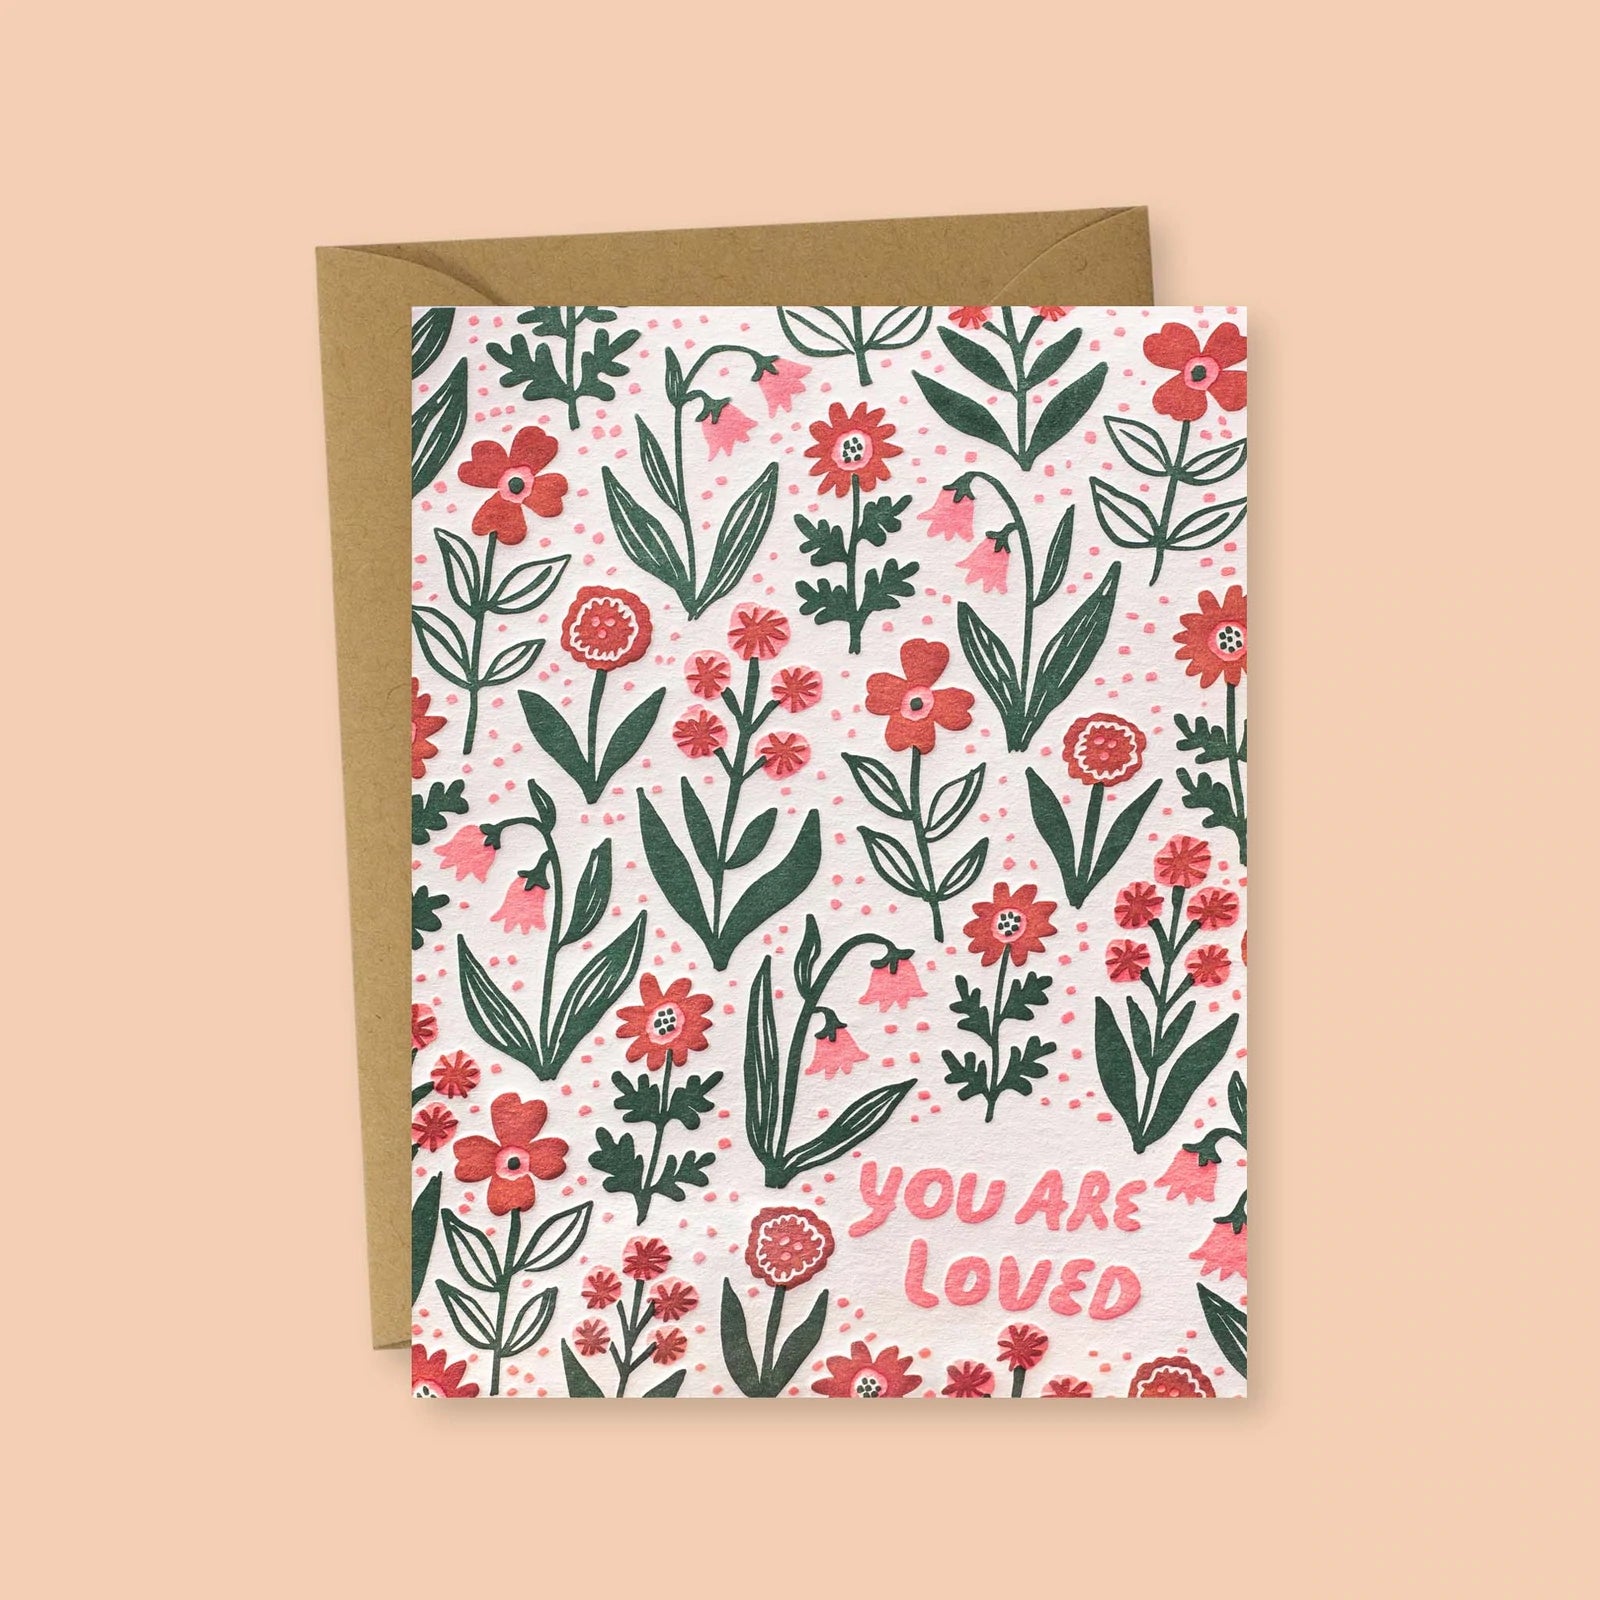 You are Loved greeting card - Phoebe Wahl